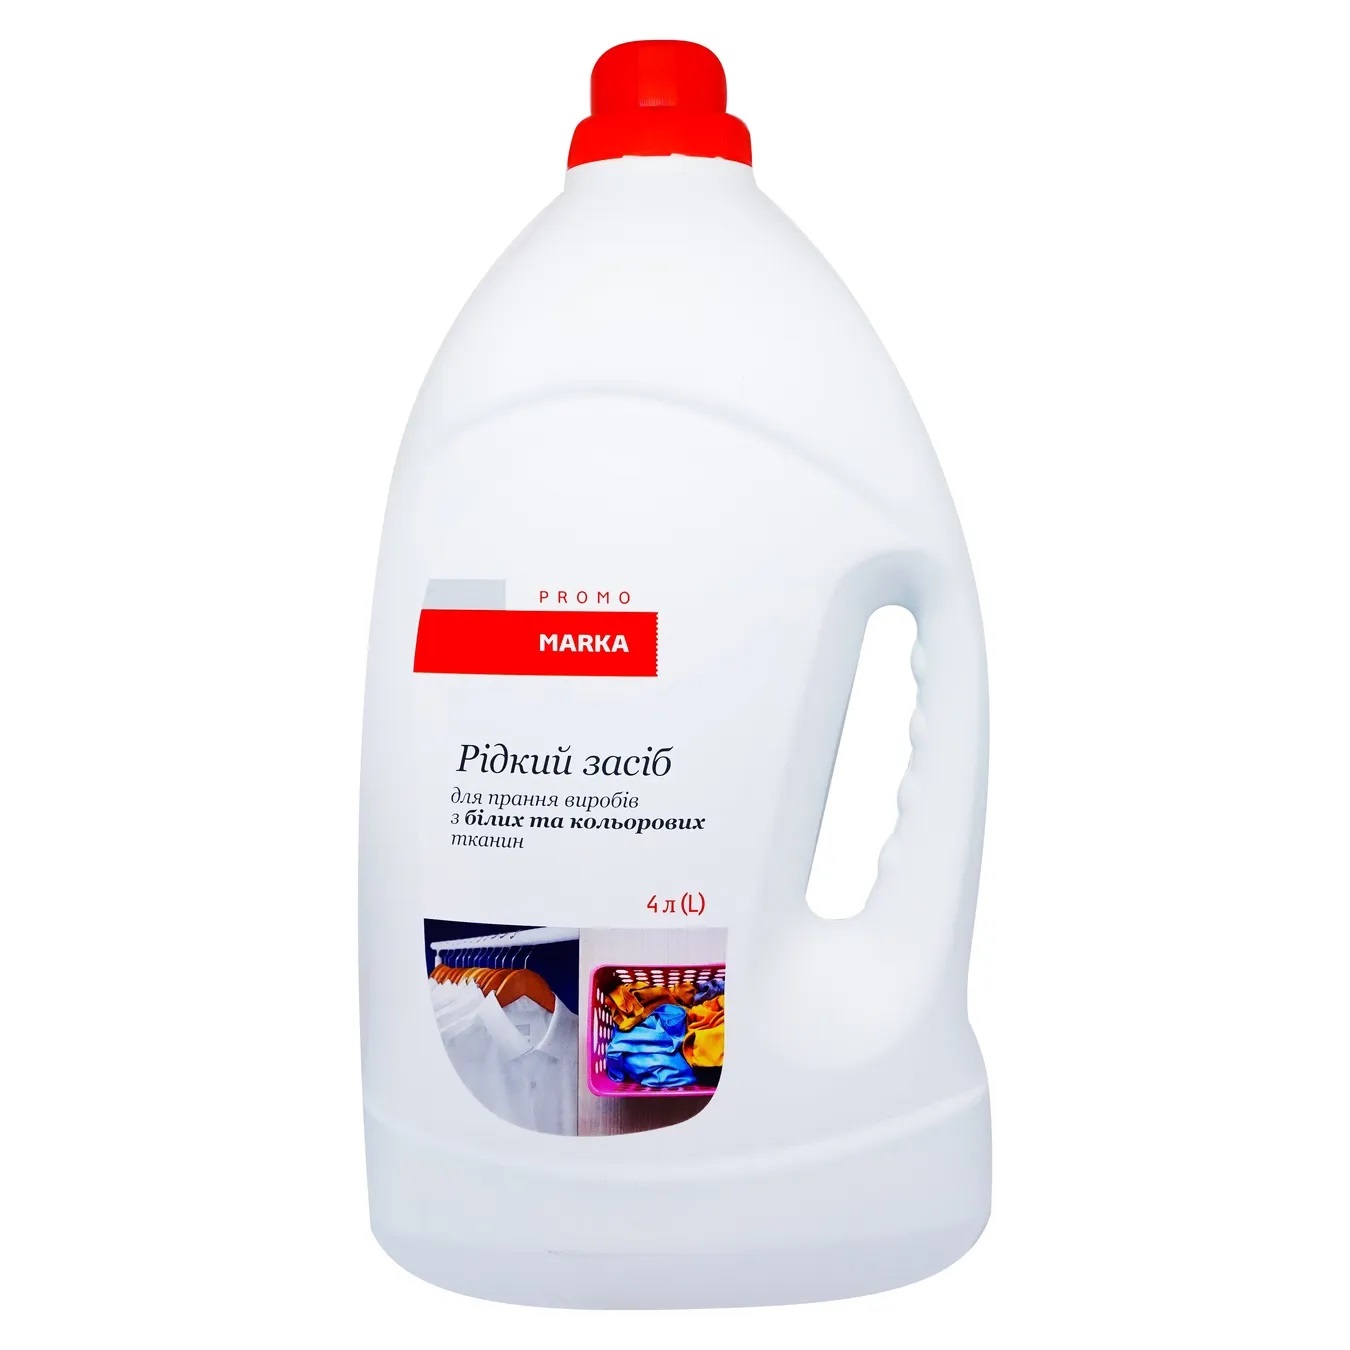 Marka Promo liquid laundry detergent for white and colored fabrics 4L